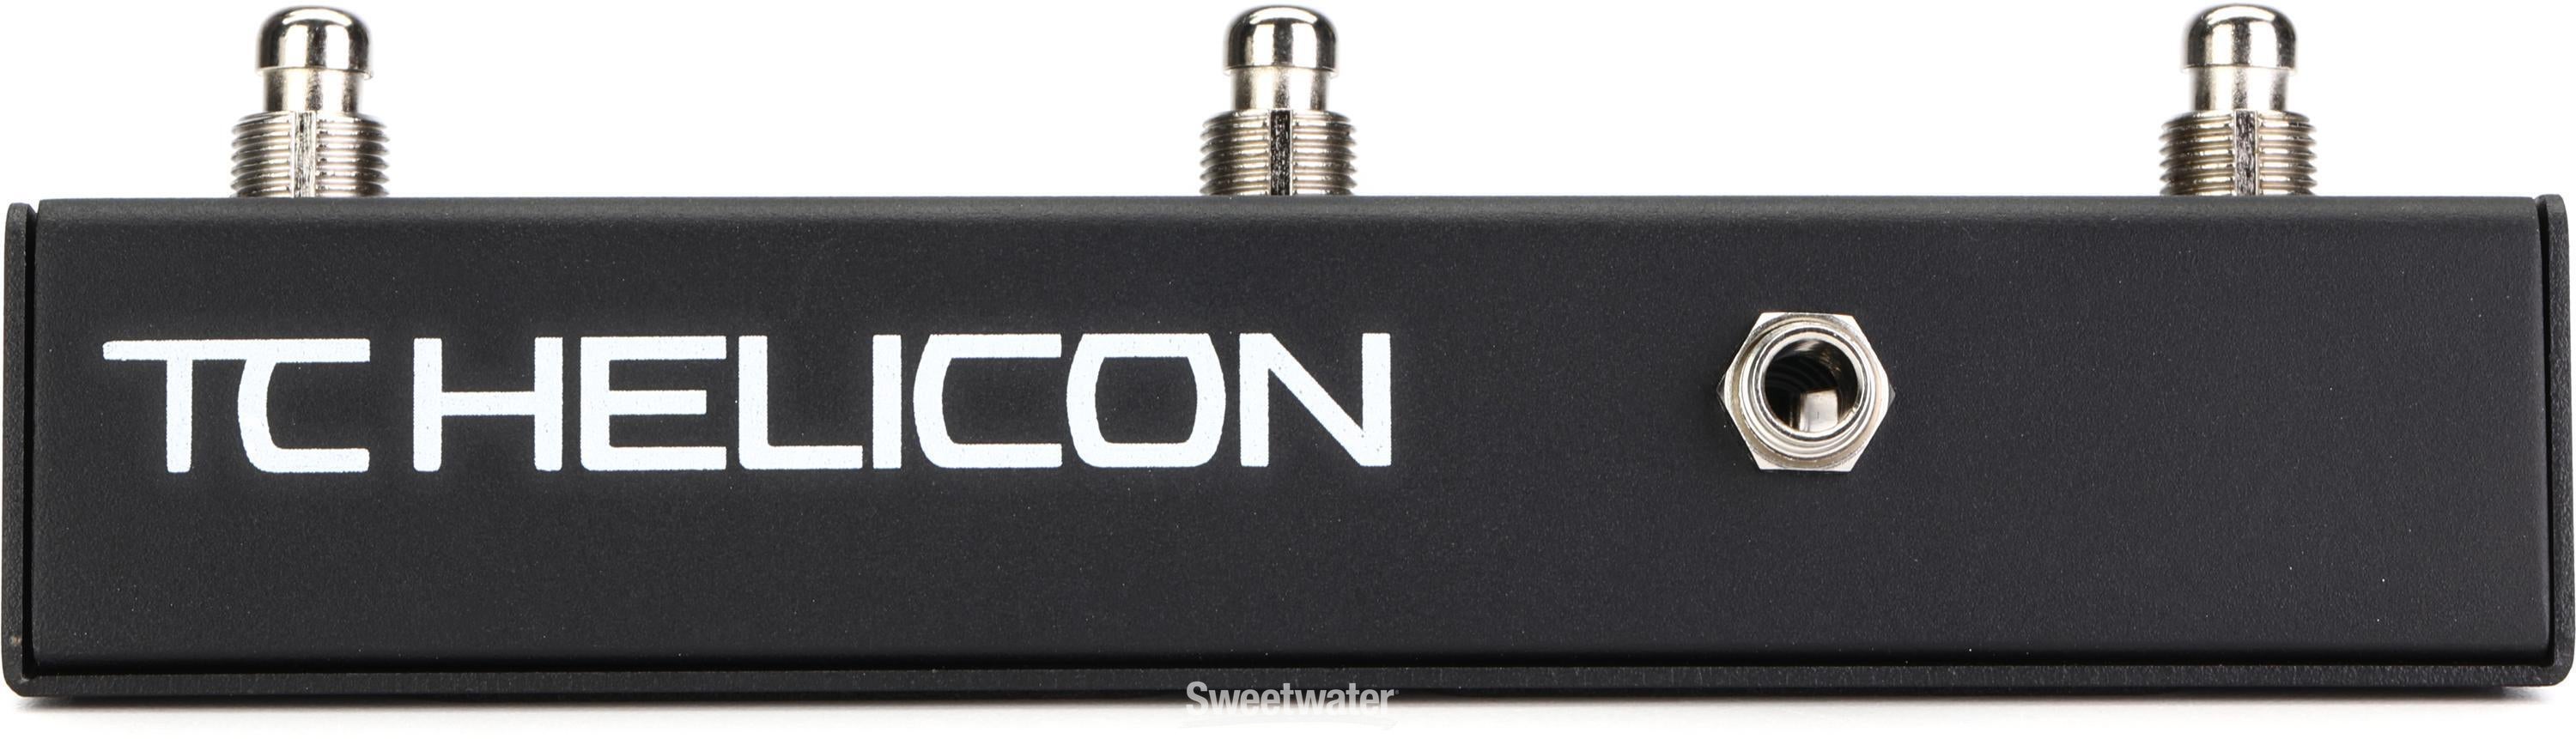 TC-Helicon Switch-3 3 Button Footswitch | Sweetwater